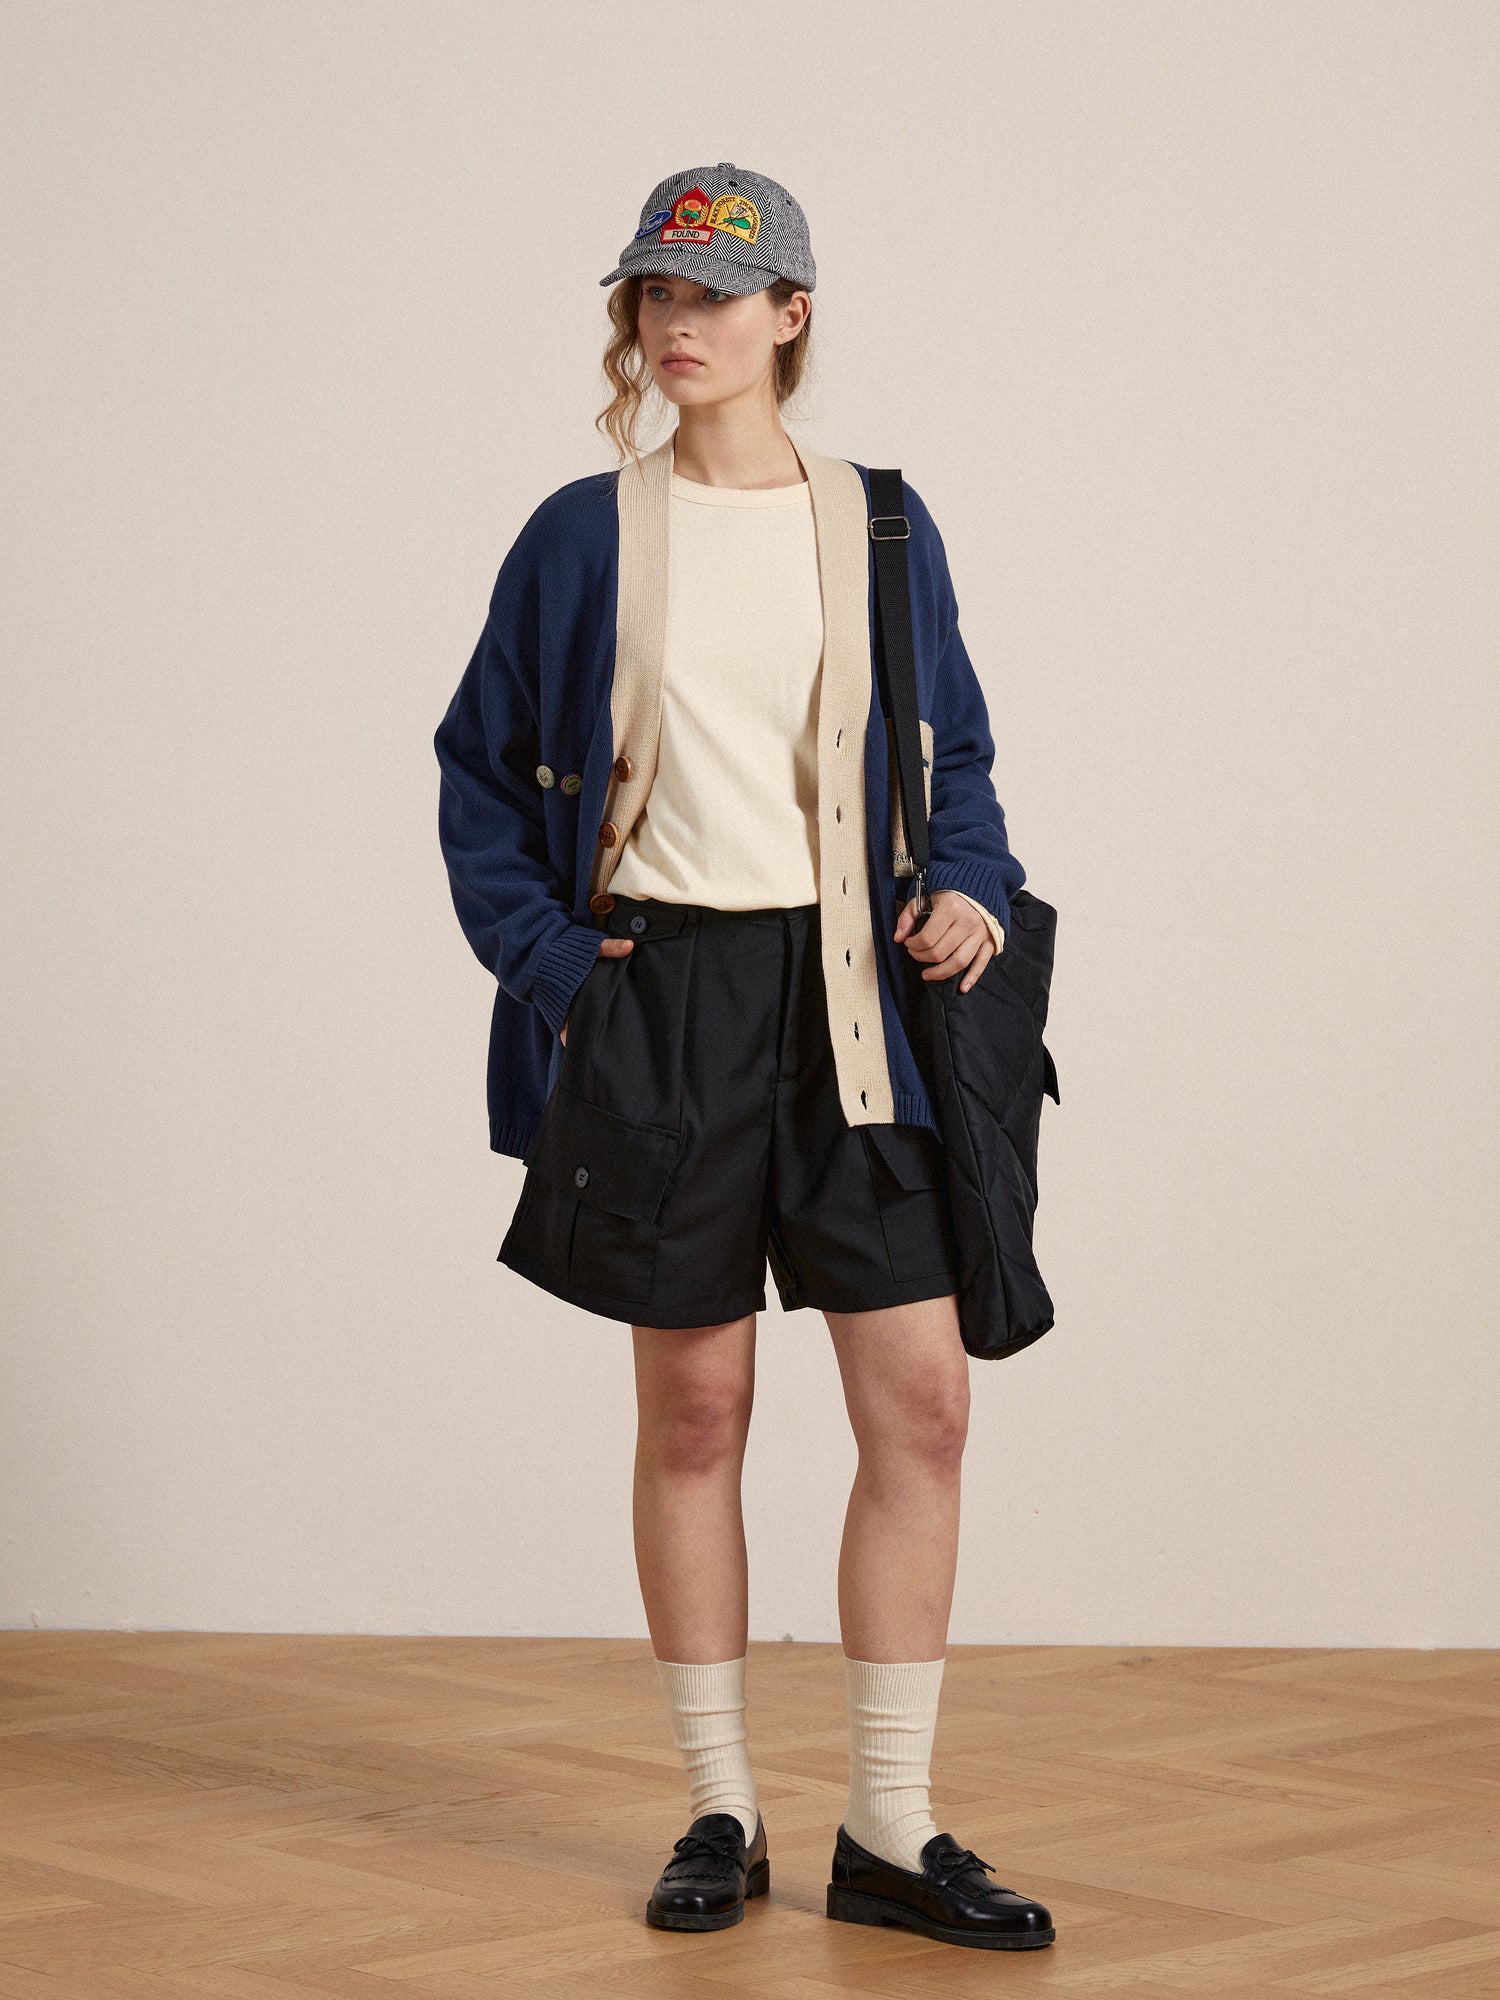 A woman in elegant Found Pleated Pocket Cargo Shorts and a hat is standing on a wooden floor.